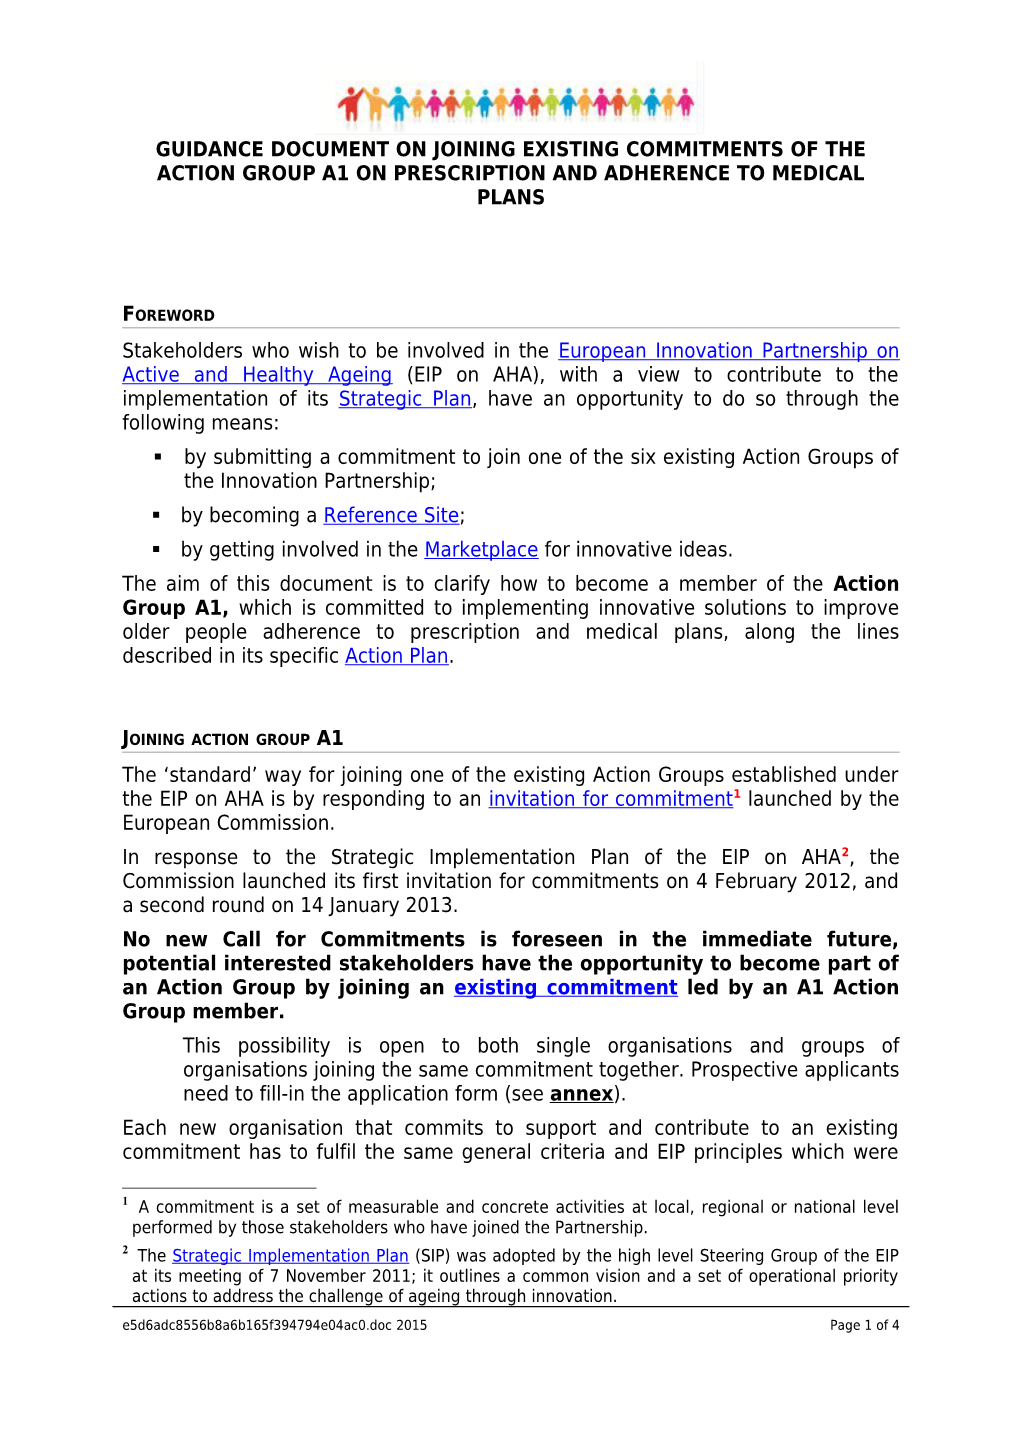 Guidance Document on Joining Existing Commitments of the Action Group A1 on Prescription